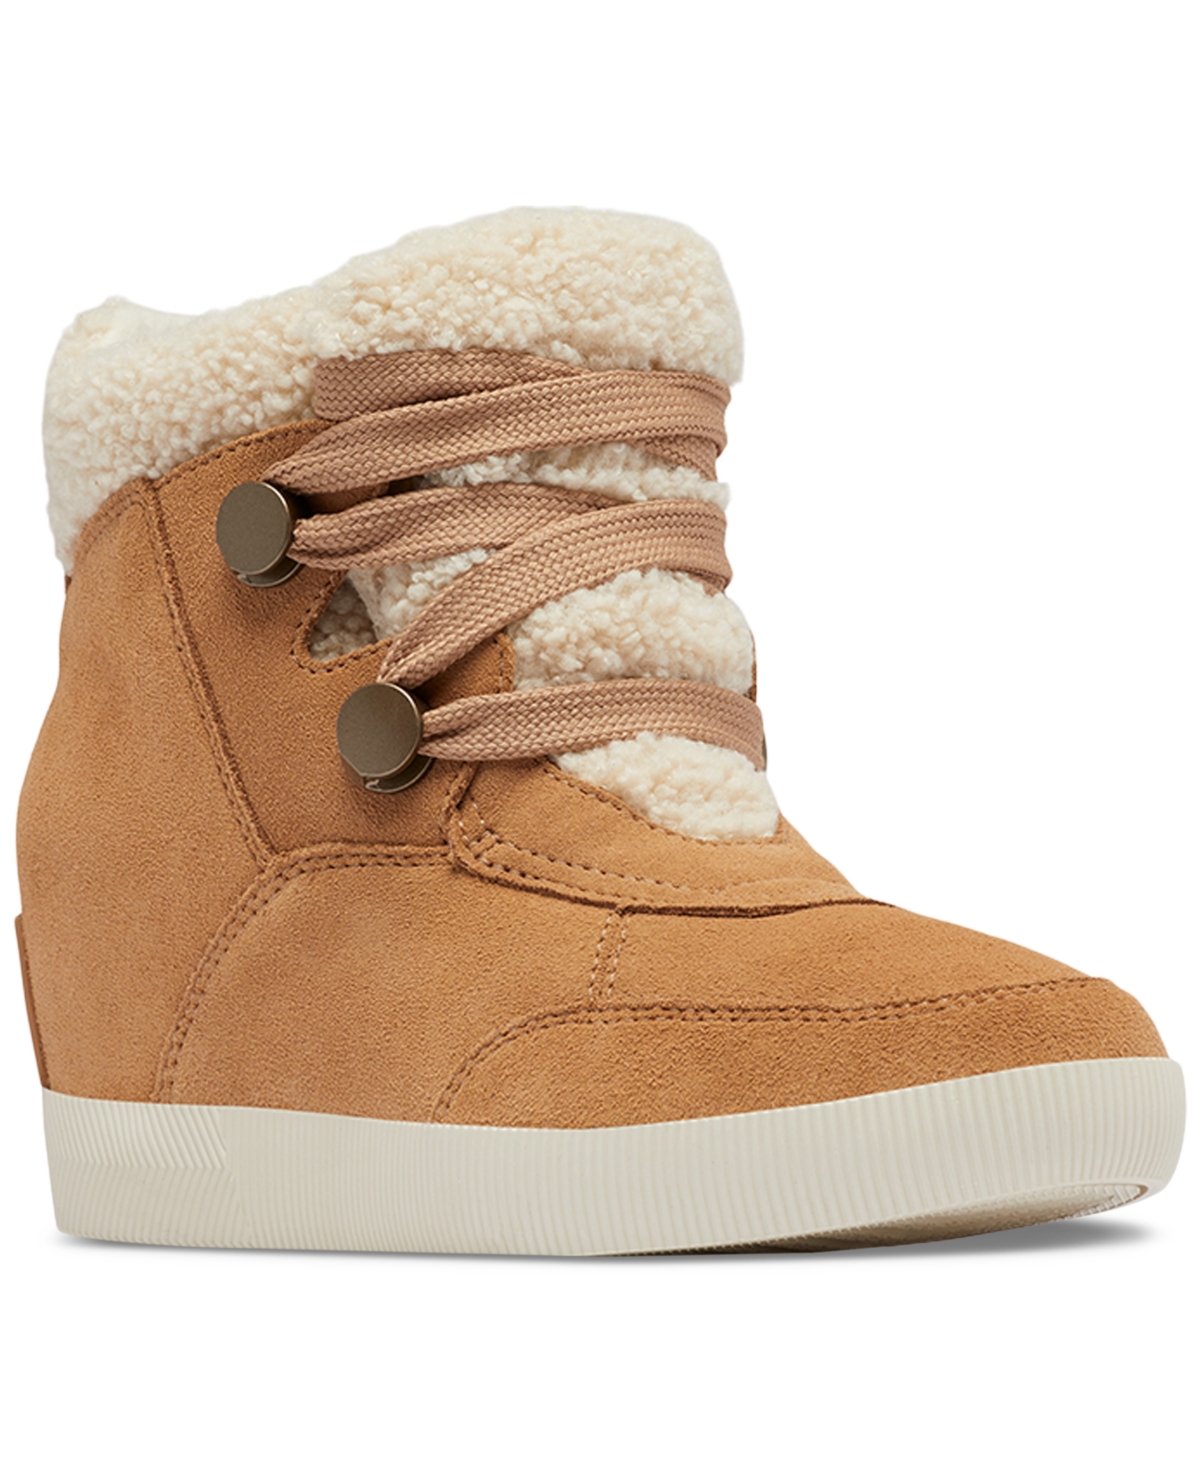 SOREL WOMEN'S OUT N ABOUT COZY WEDGE BOOTIES